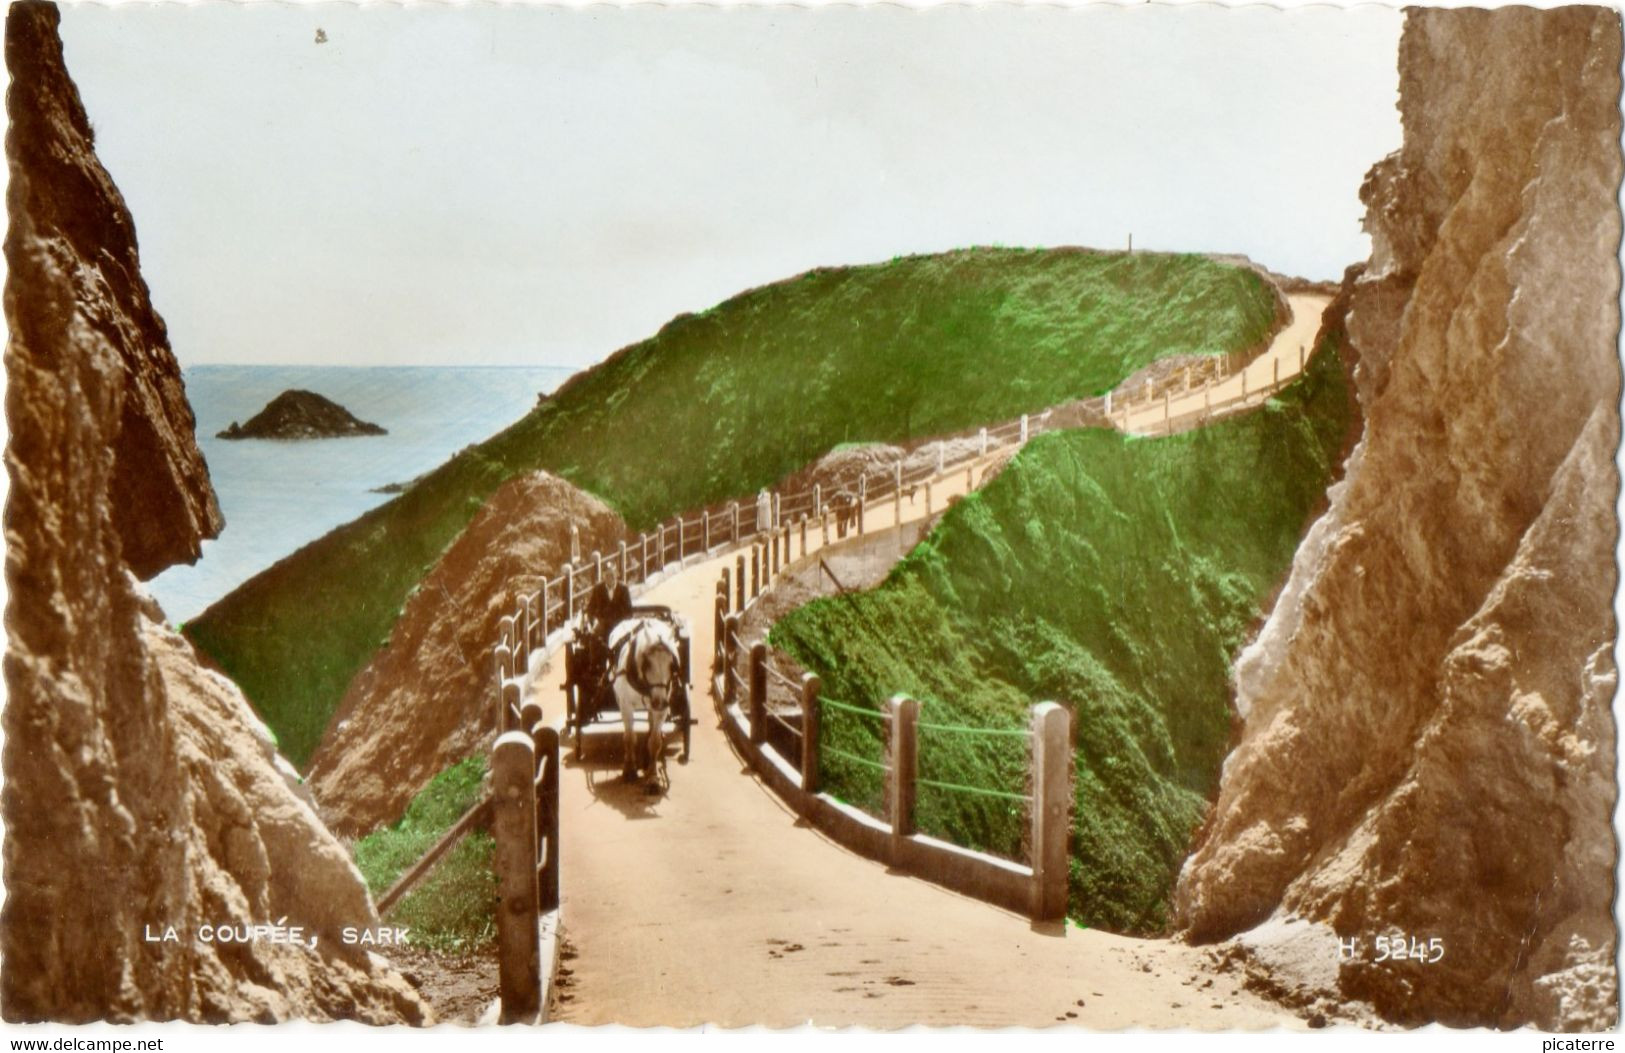 La Coupee, Sark H 5245 (Valentines-Real Photograph) Horse & Trap, Carriage Crossing La Coupee-STUNNING CARD ! - Sark